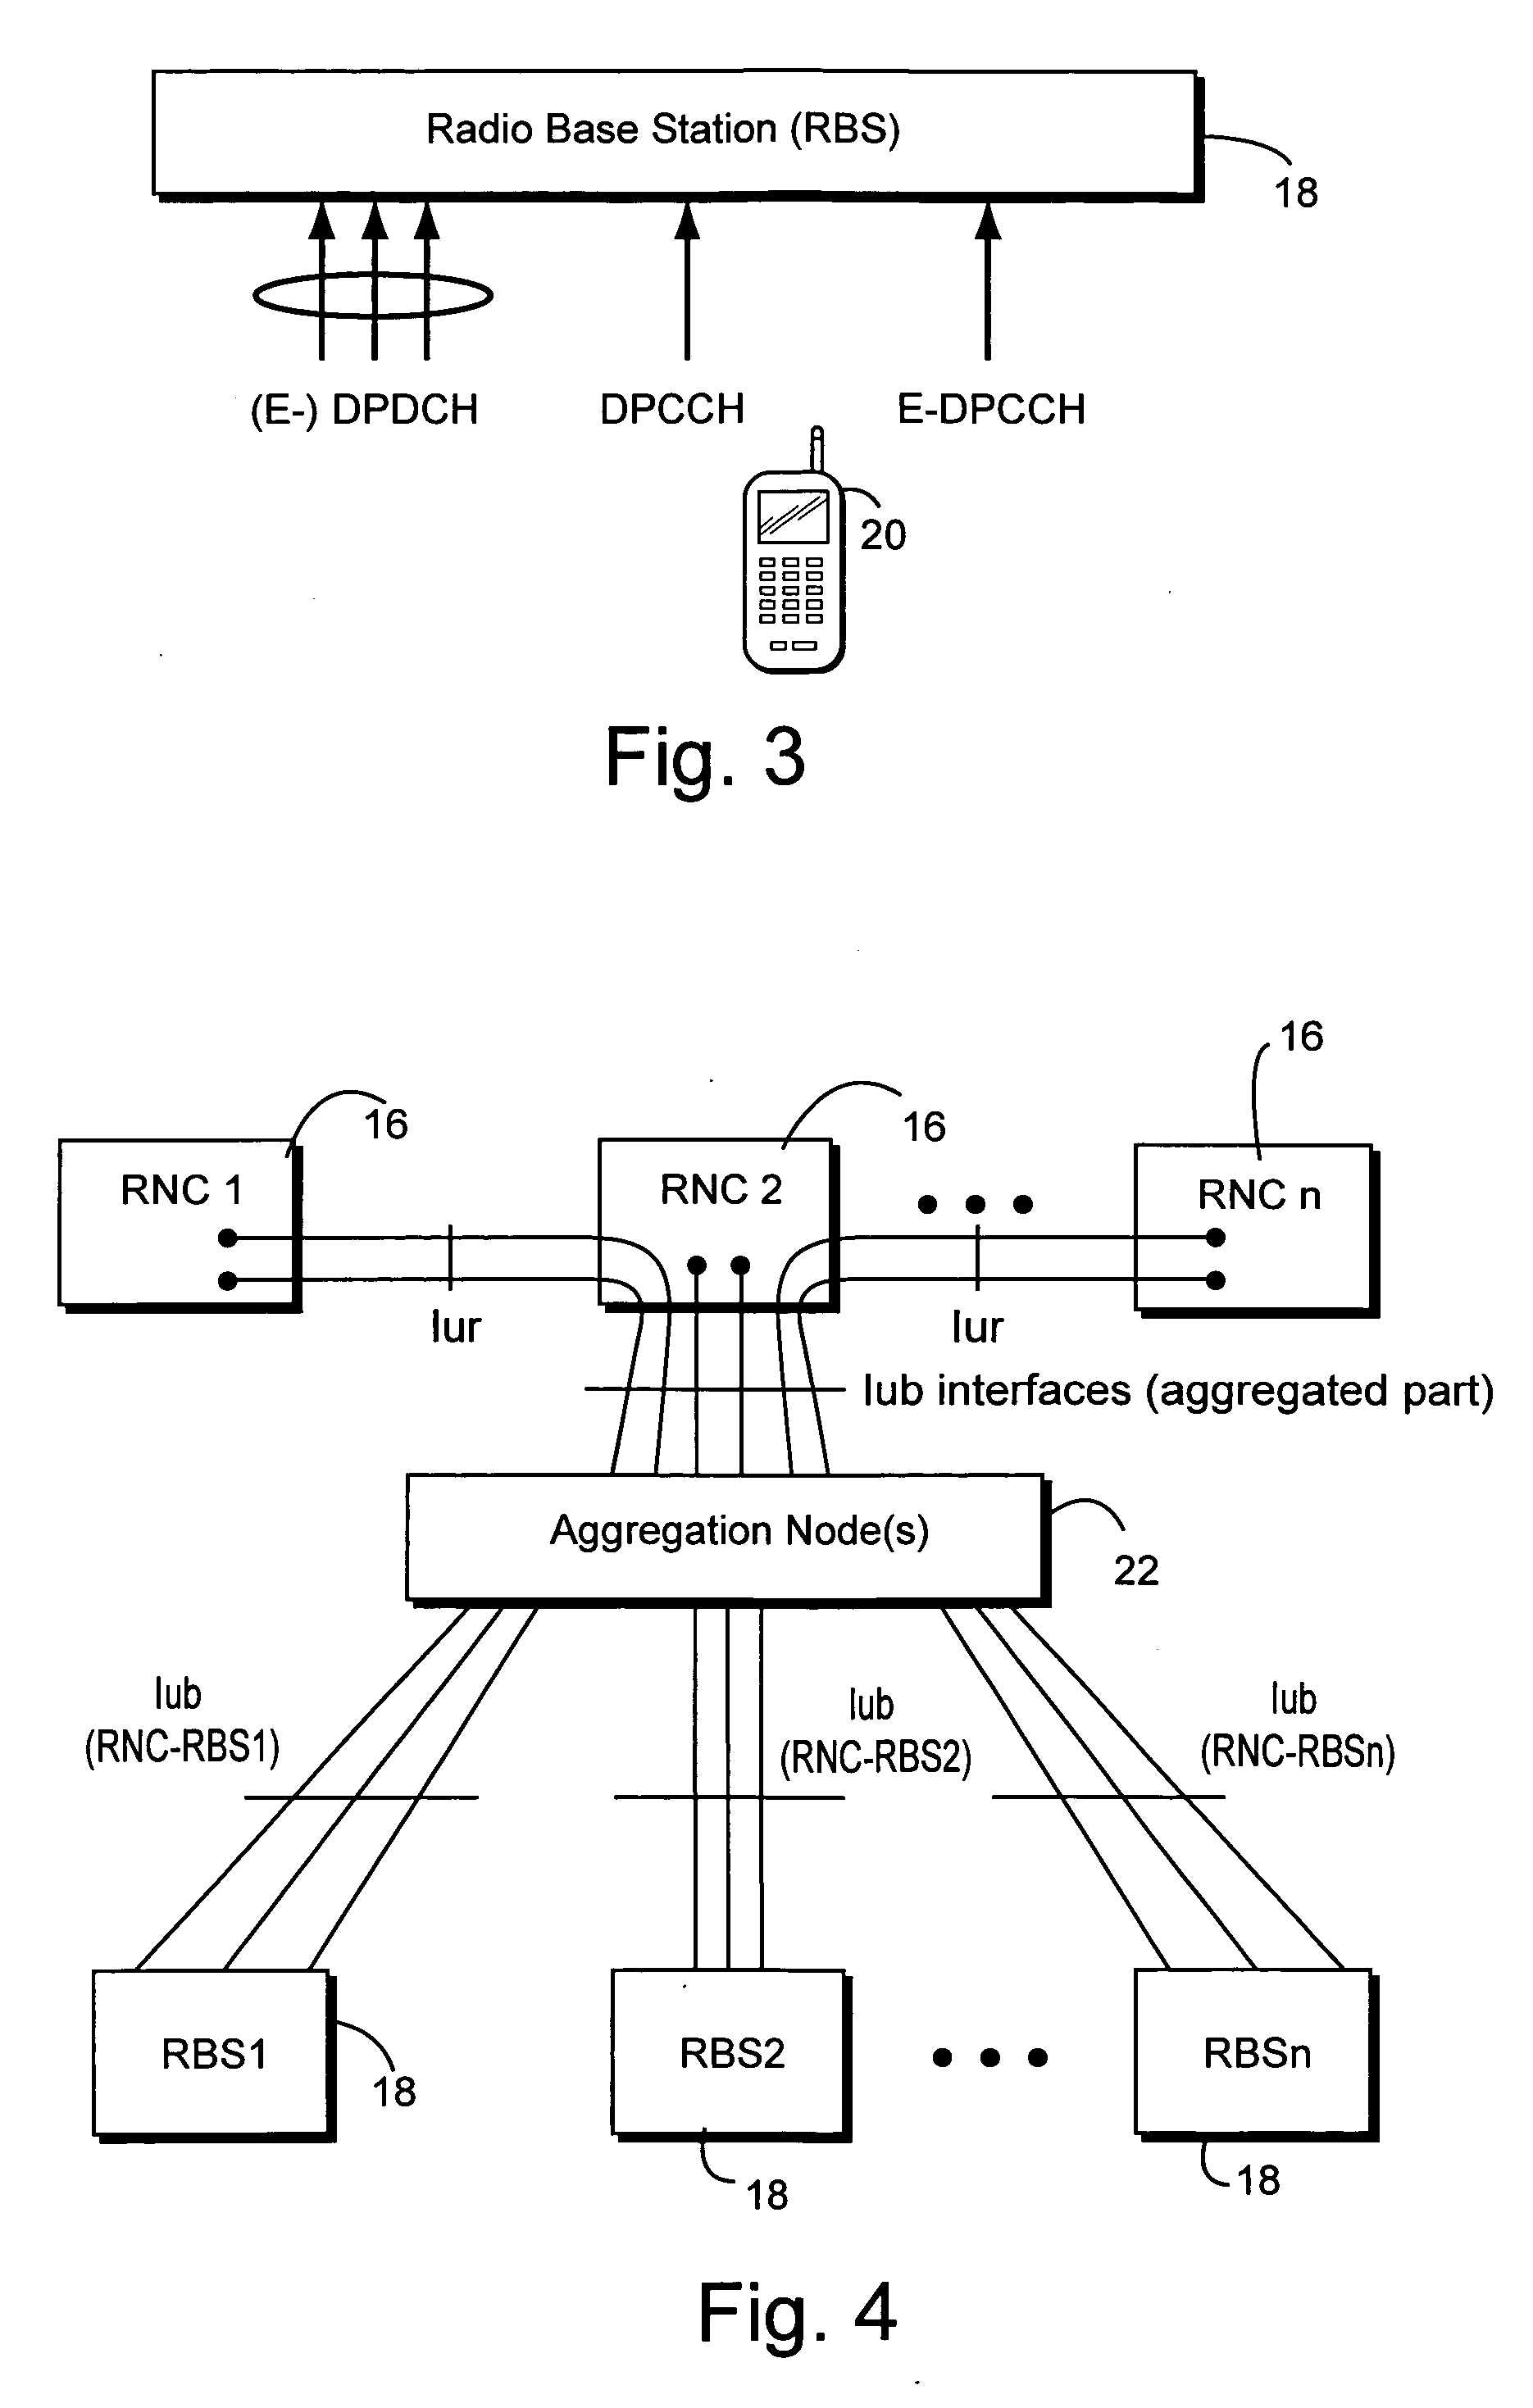 Uplink congestion detection and control between nodes in a radio access network